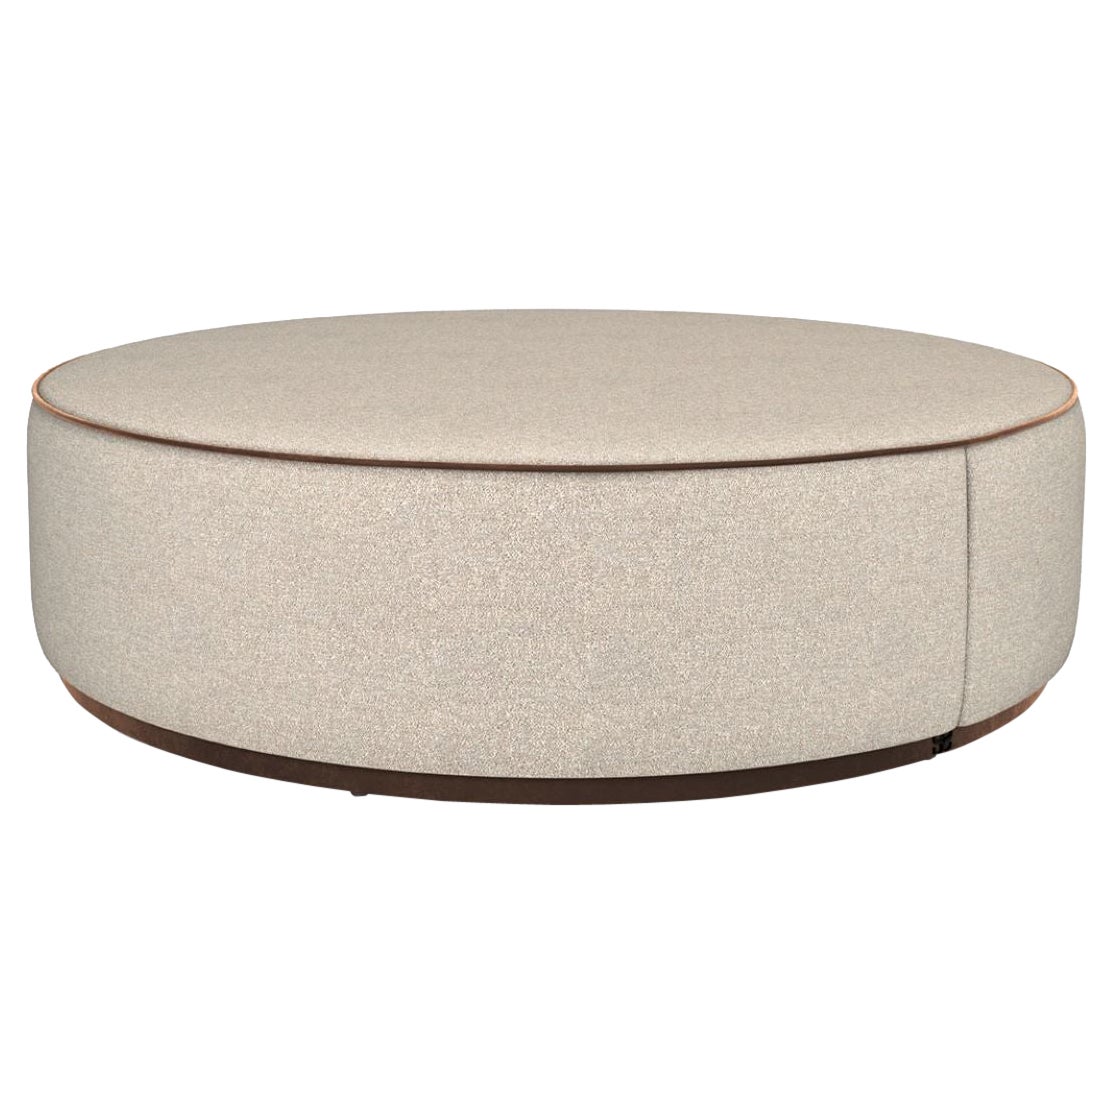 Pouf in Wood Structure Plinth and Structure Covered in Fabric Customizable For Sale